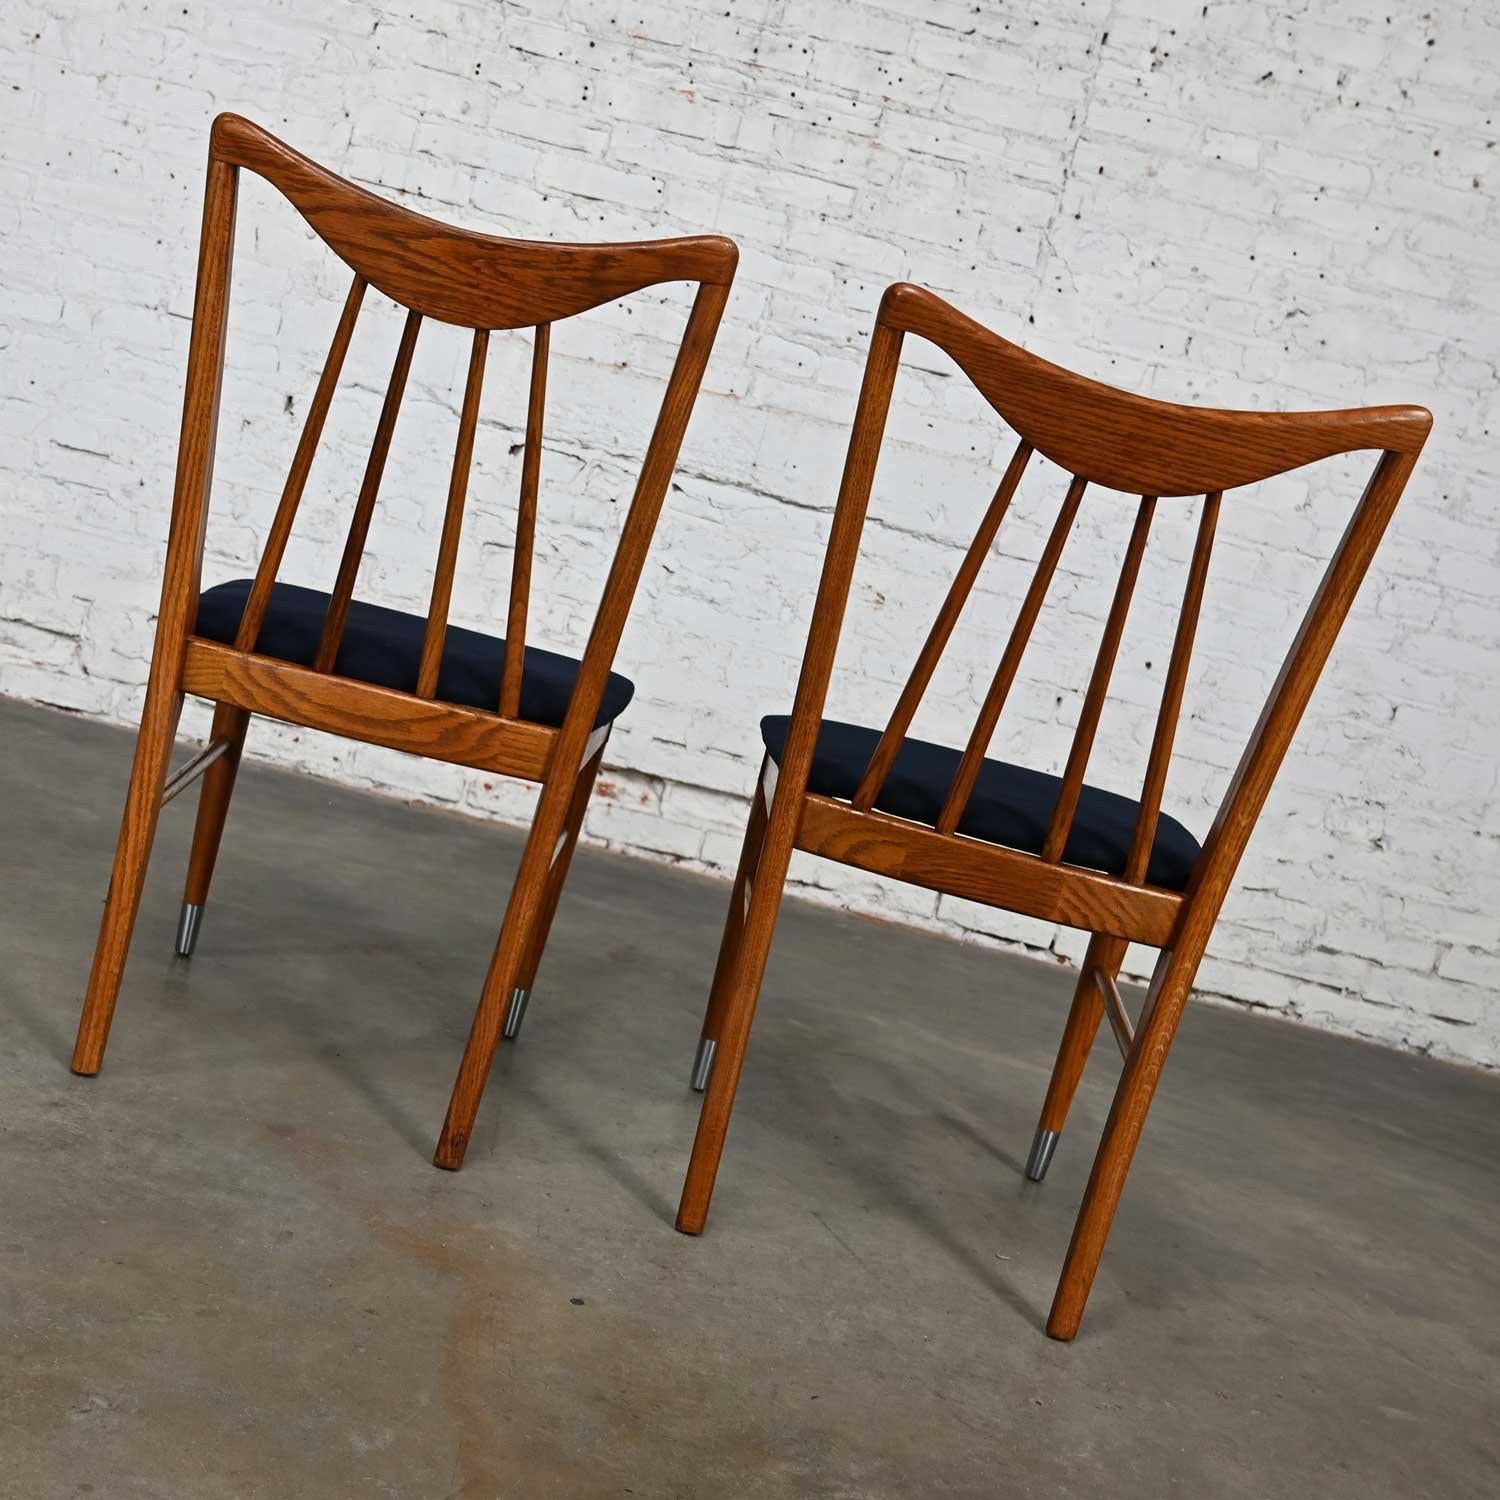 Vintage MCM Keller Furniture Oak Valkerie ii Dining Chairs by Edmond J Spence In Good Condition For Sale In Topeka, KS